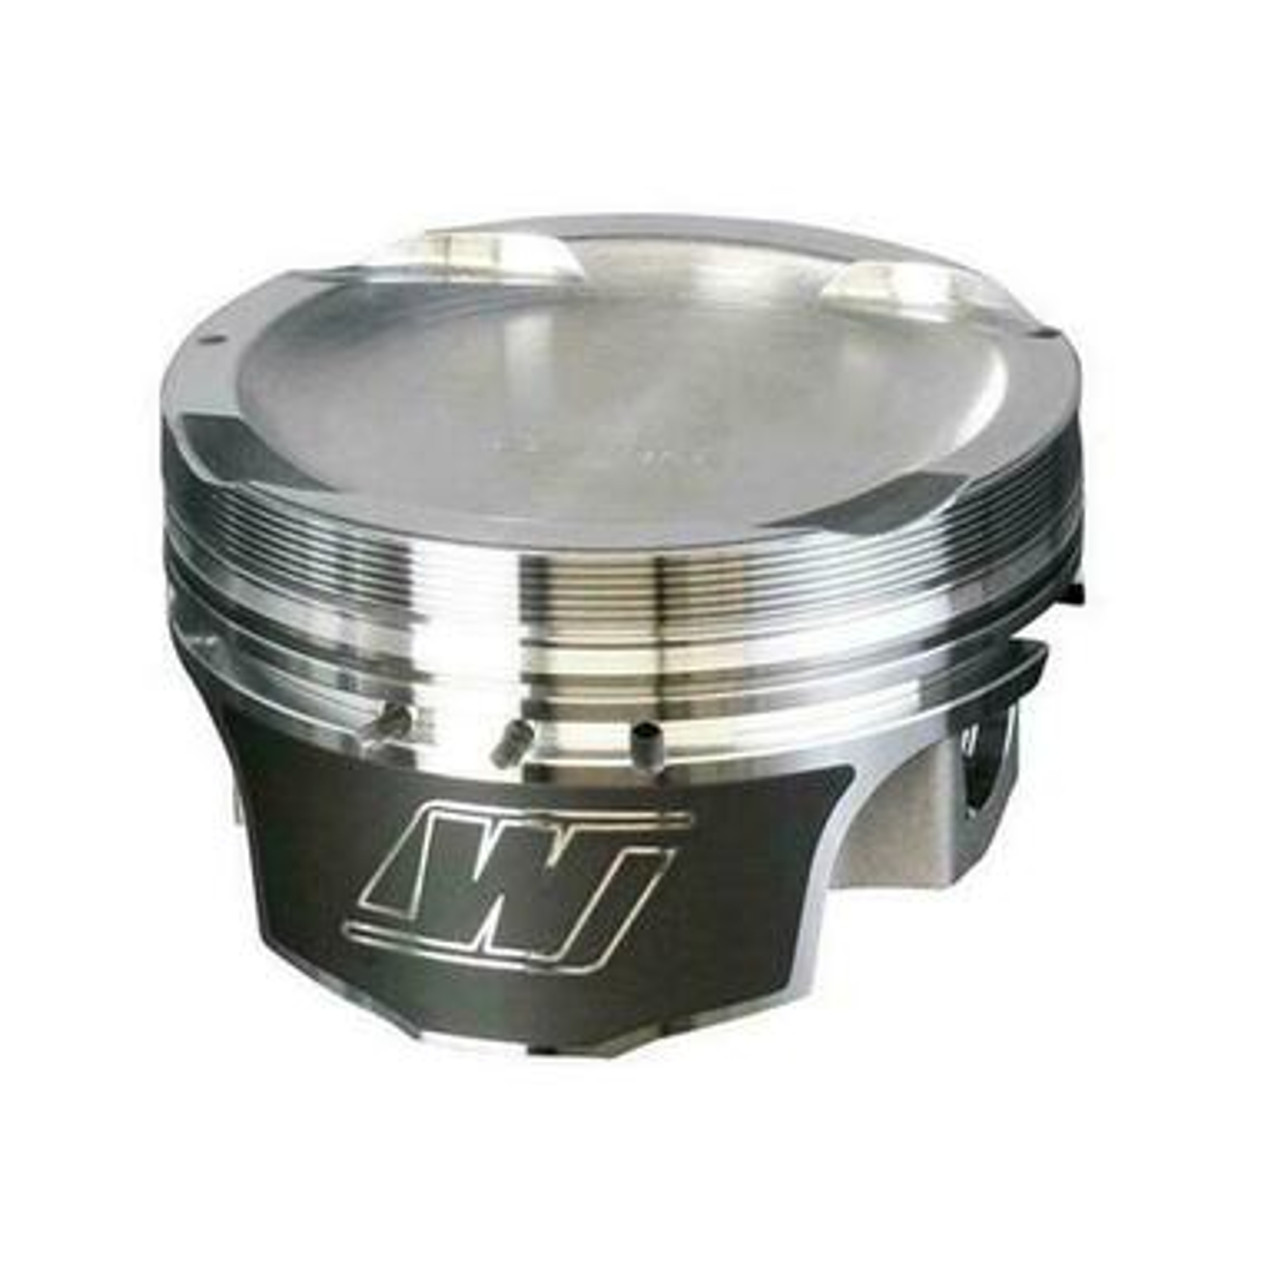 Pro Tru Pistons; Sport Compact Series; Set of 6 Pistons; Recommended RingSet: 9550XX; Rings & Pins Included